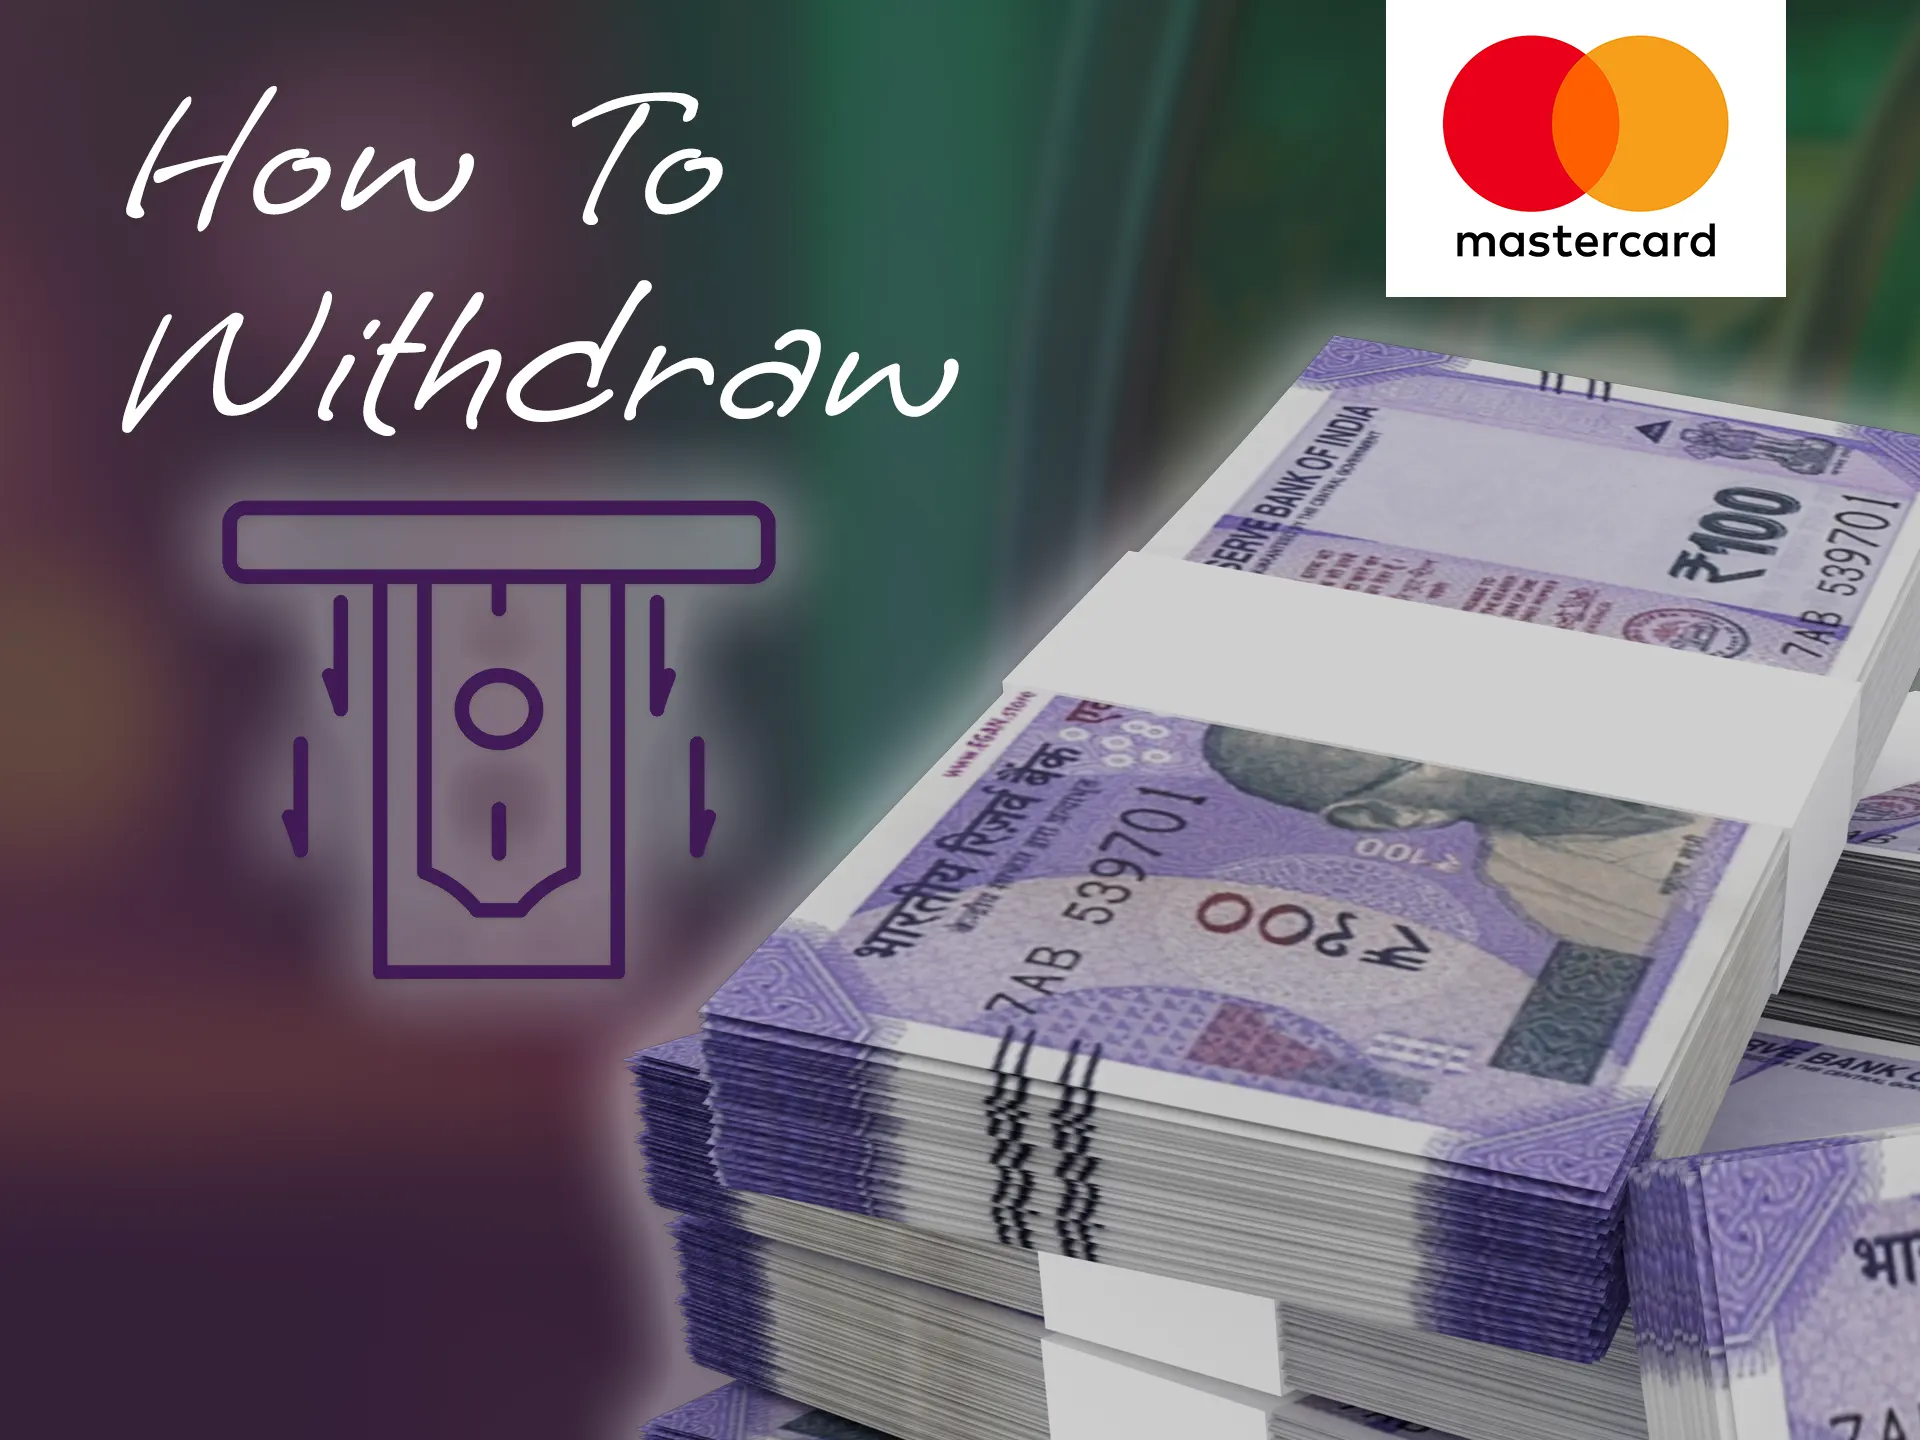 Make a withdrawal using the Mastercard payment system.